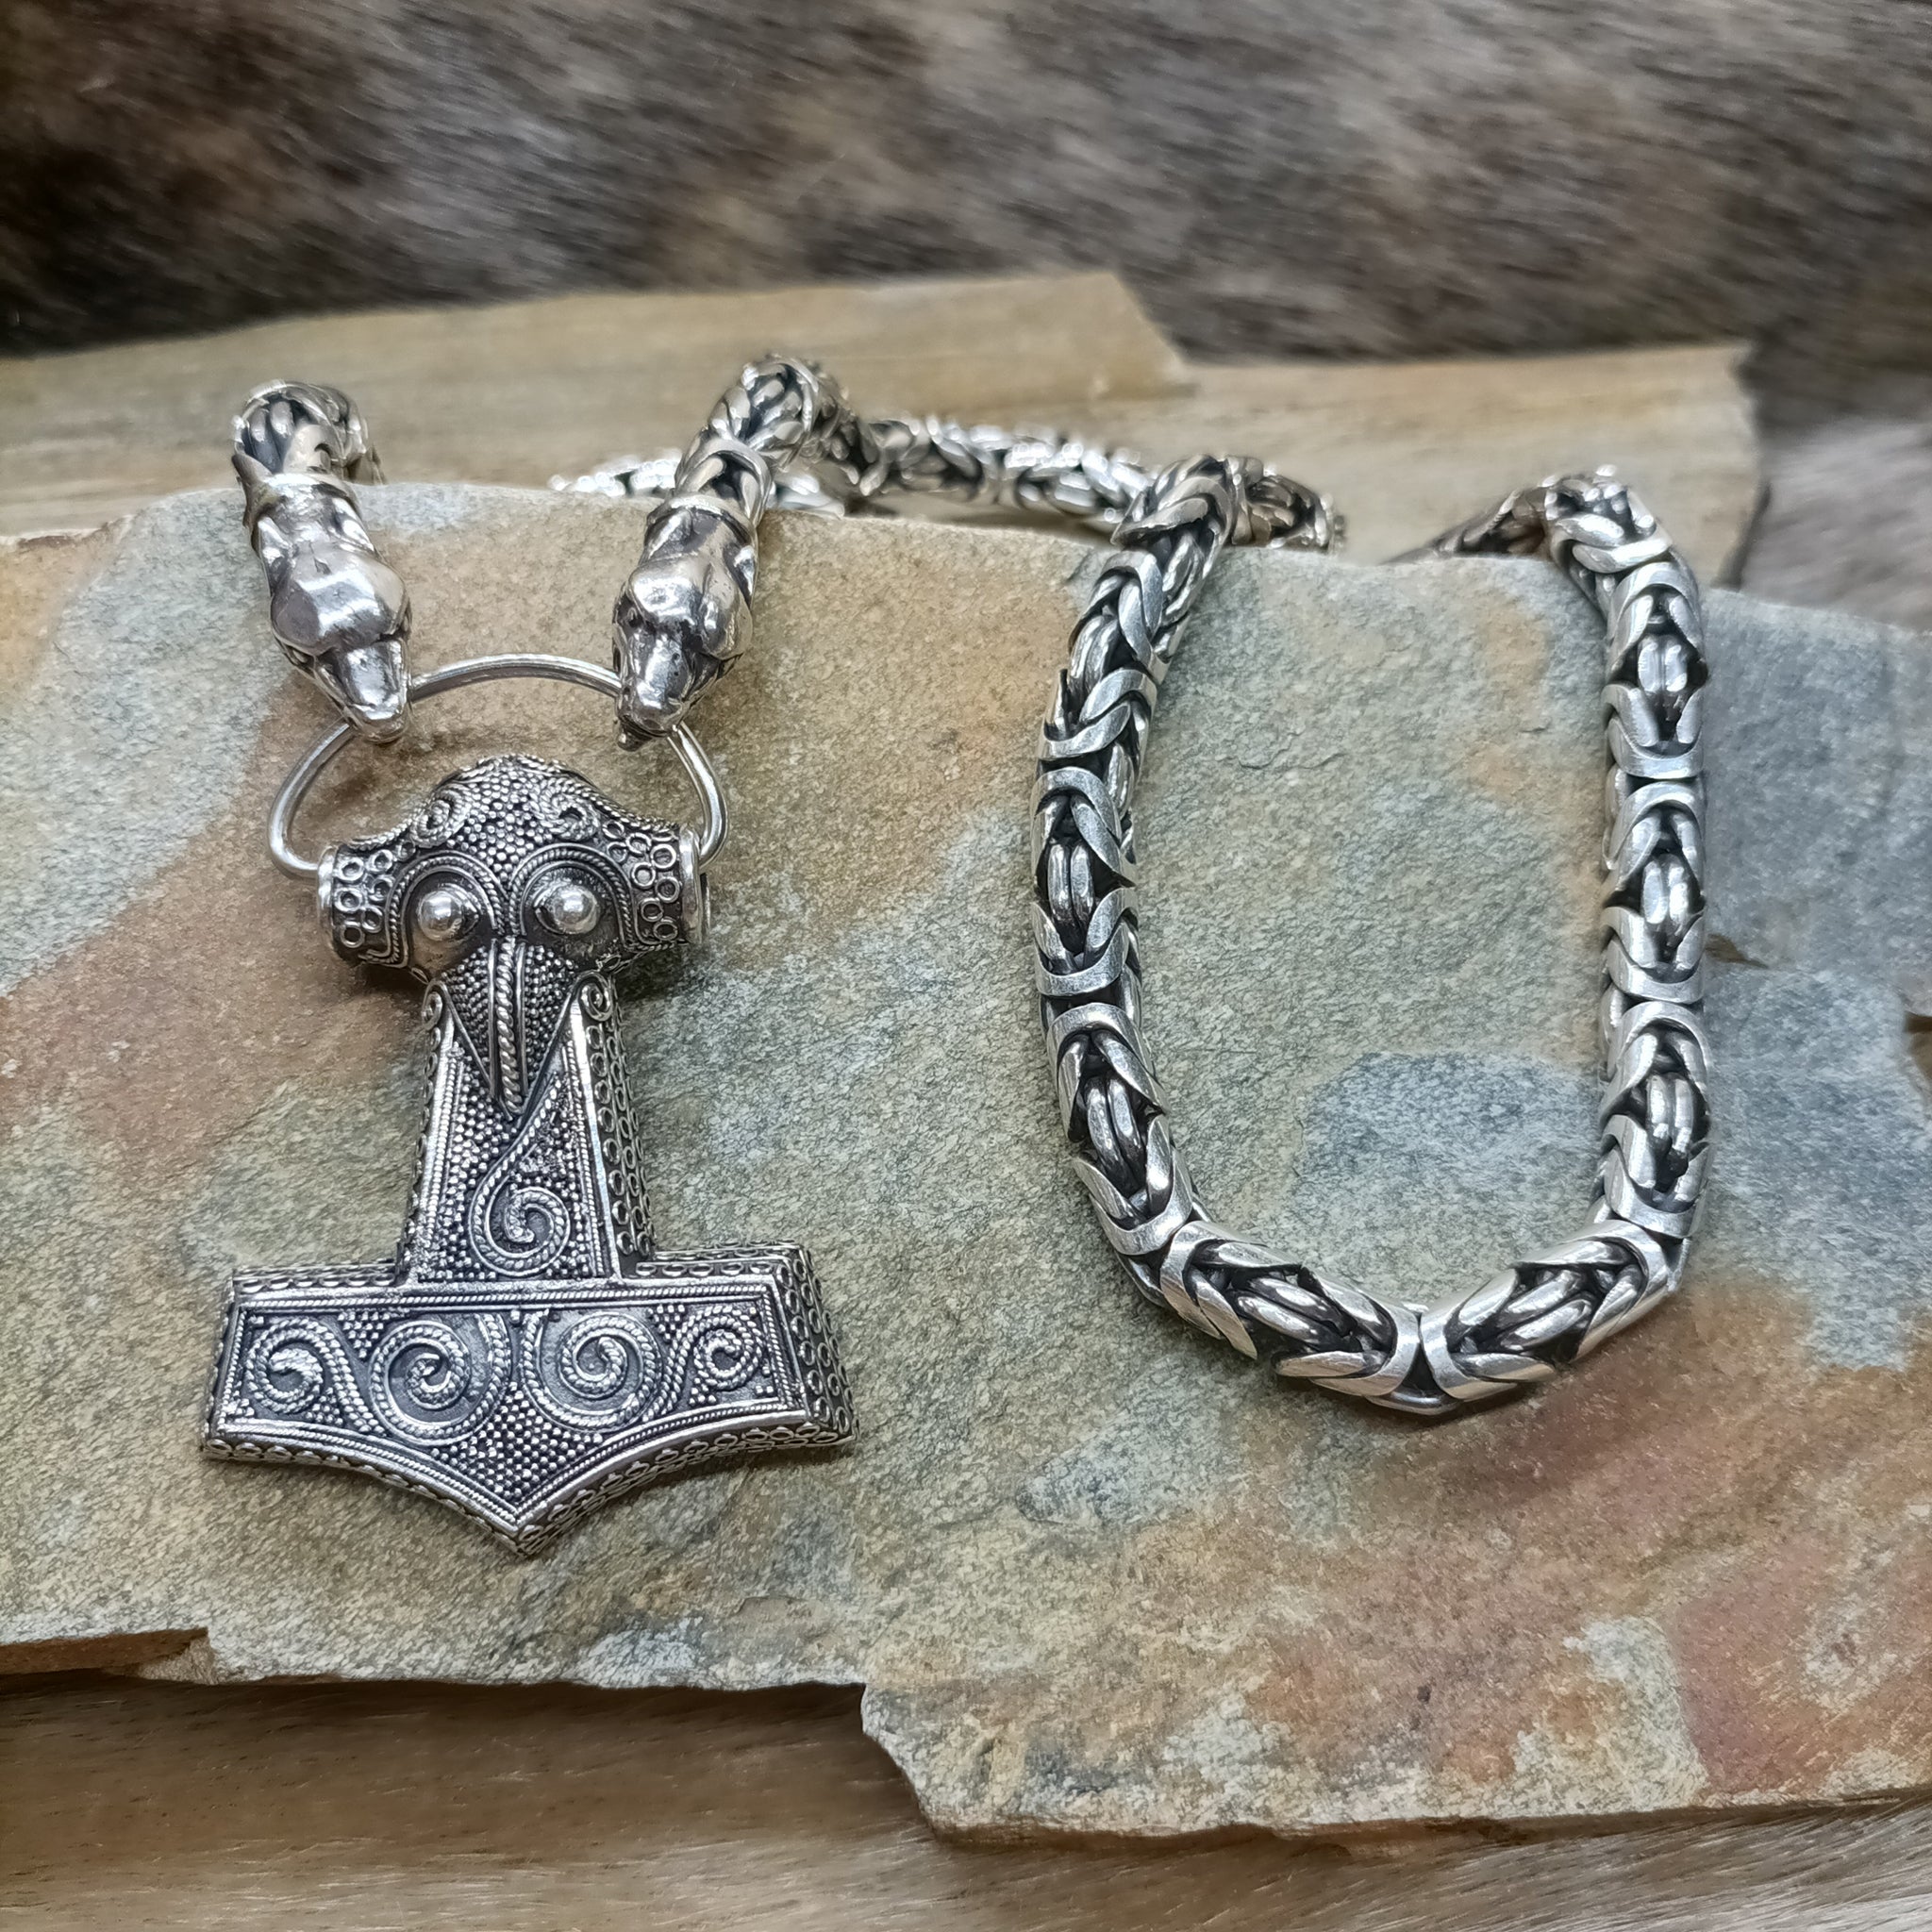 8mm Thick Silver King Chain Thors Hammer Necklace with Ferocious Wolf Heads and Large Silver Kabara Thors Hammer on Rock